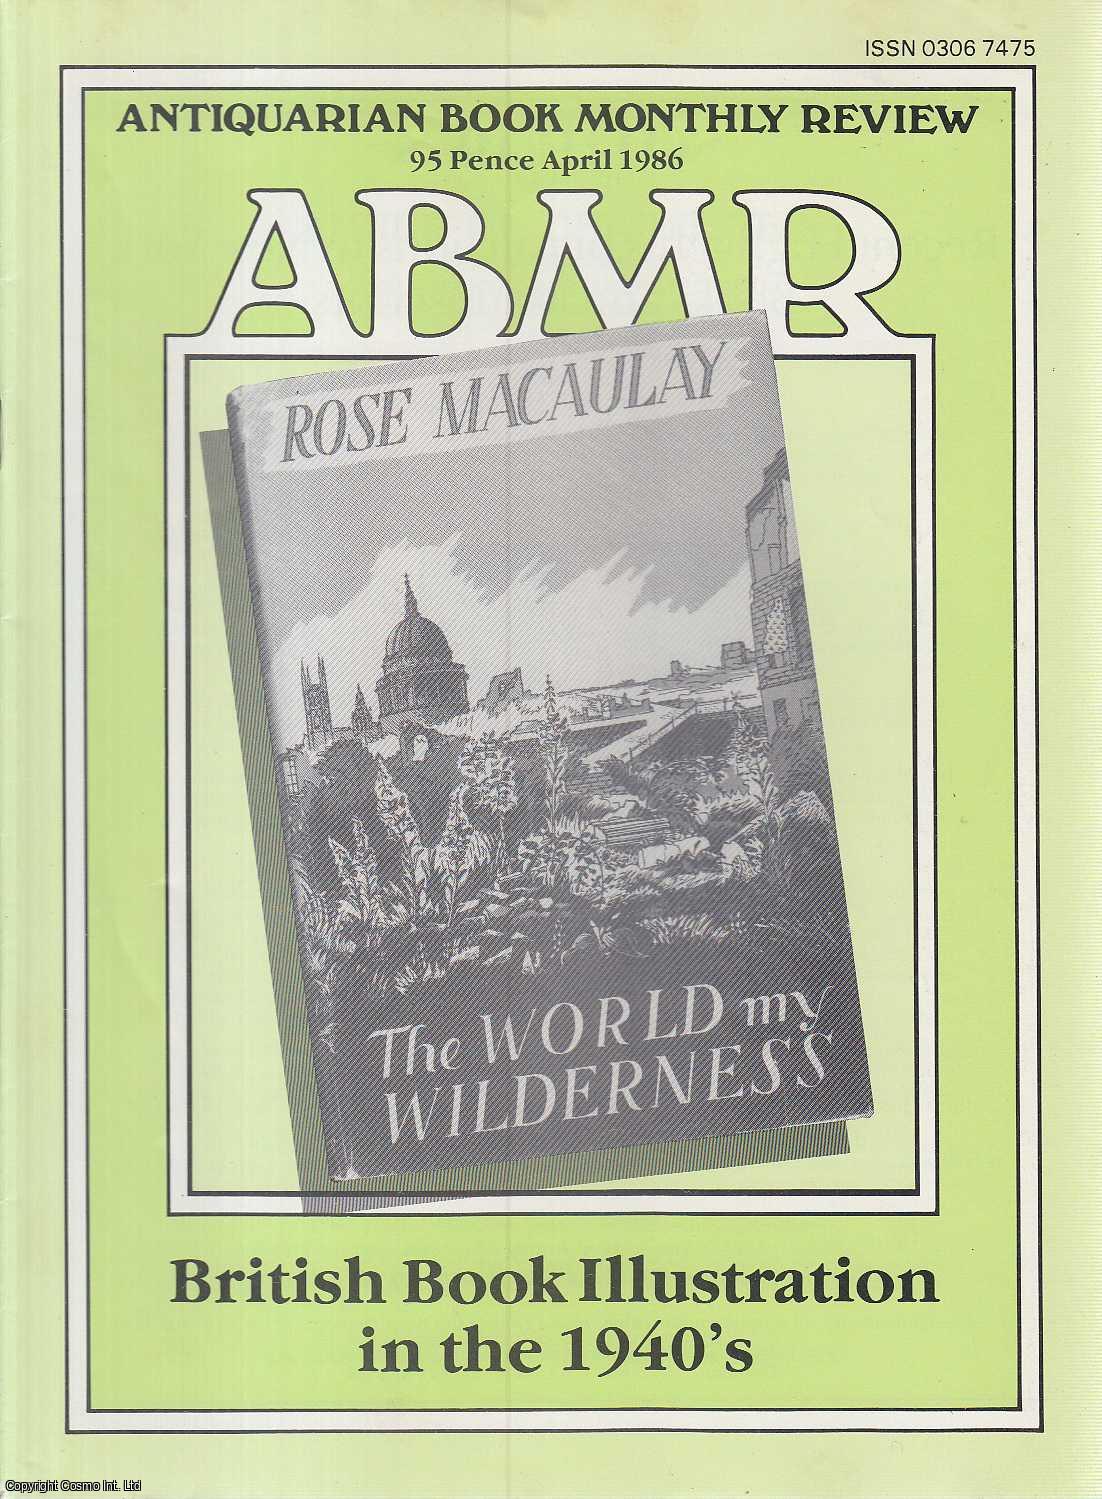 Dr. Basil Hunnisett - Alaric Watts and the Literary Souvenir. An original article contained in a complete monthly issue of the Antiquarian Book Monthly Review (ABMR), 1986.